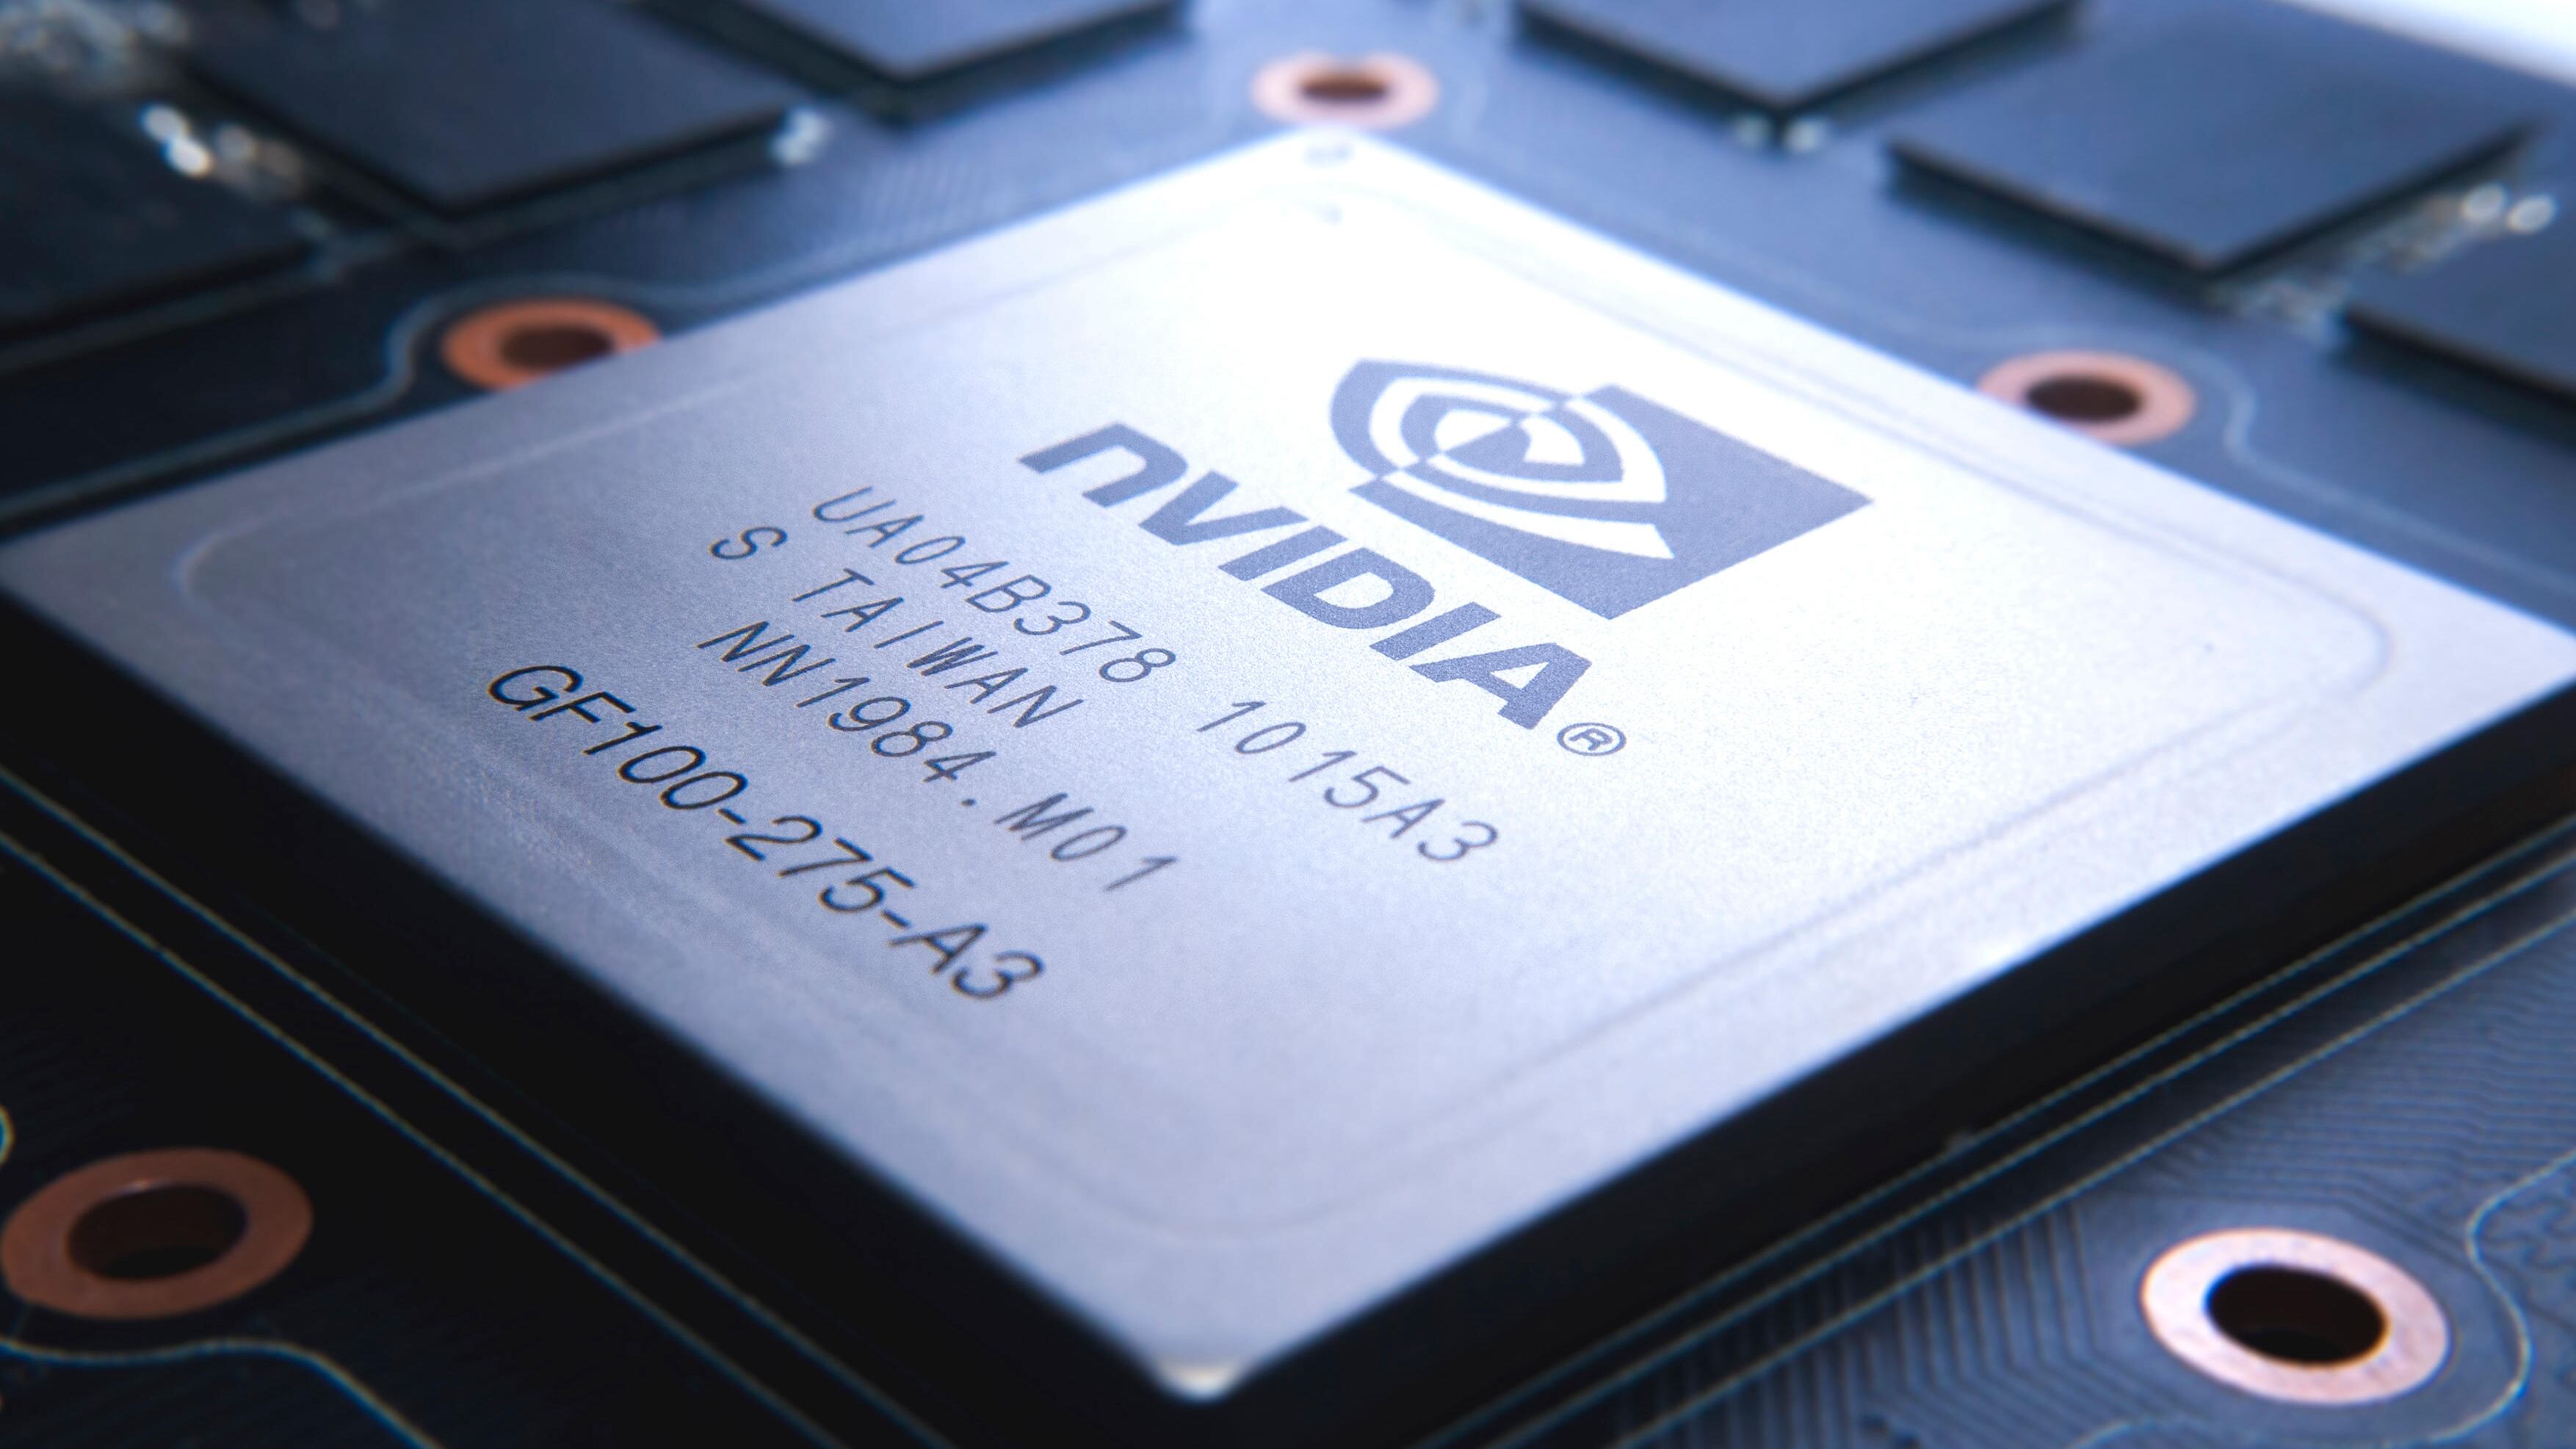 Nvidia is one of the key makers of computer chips